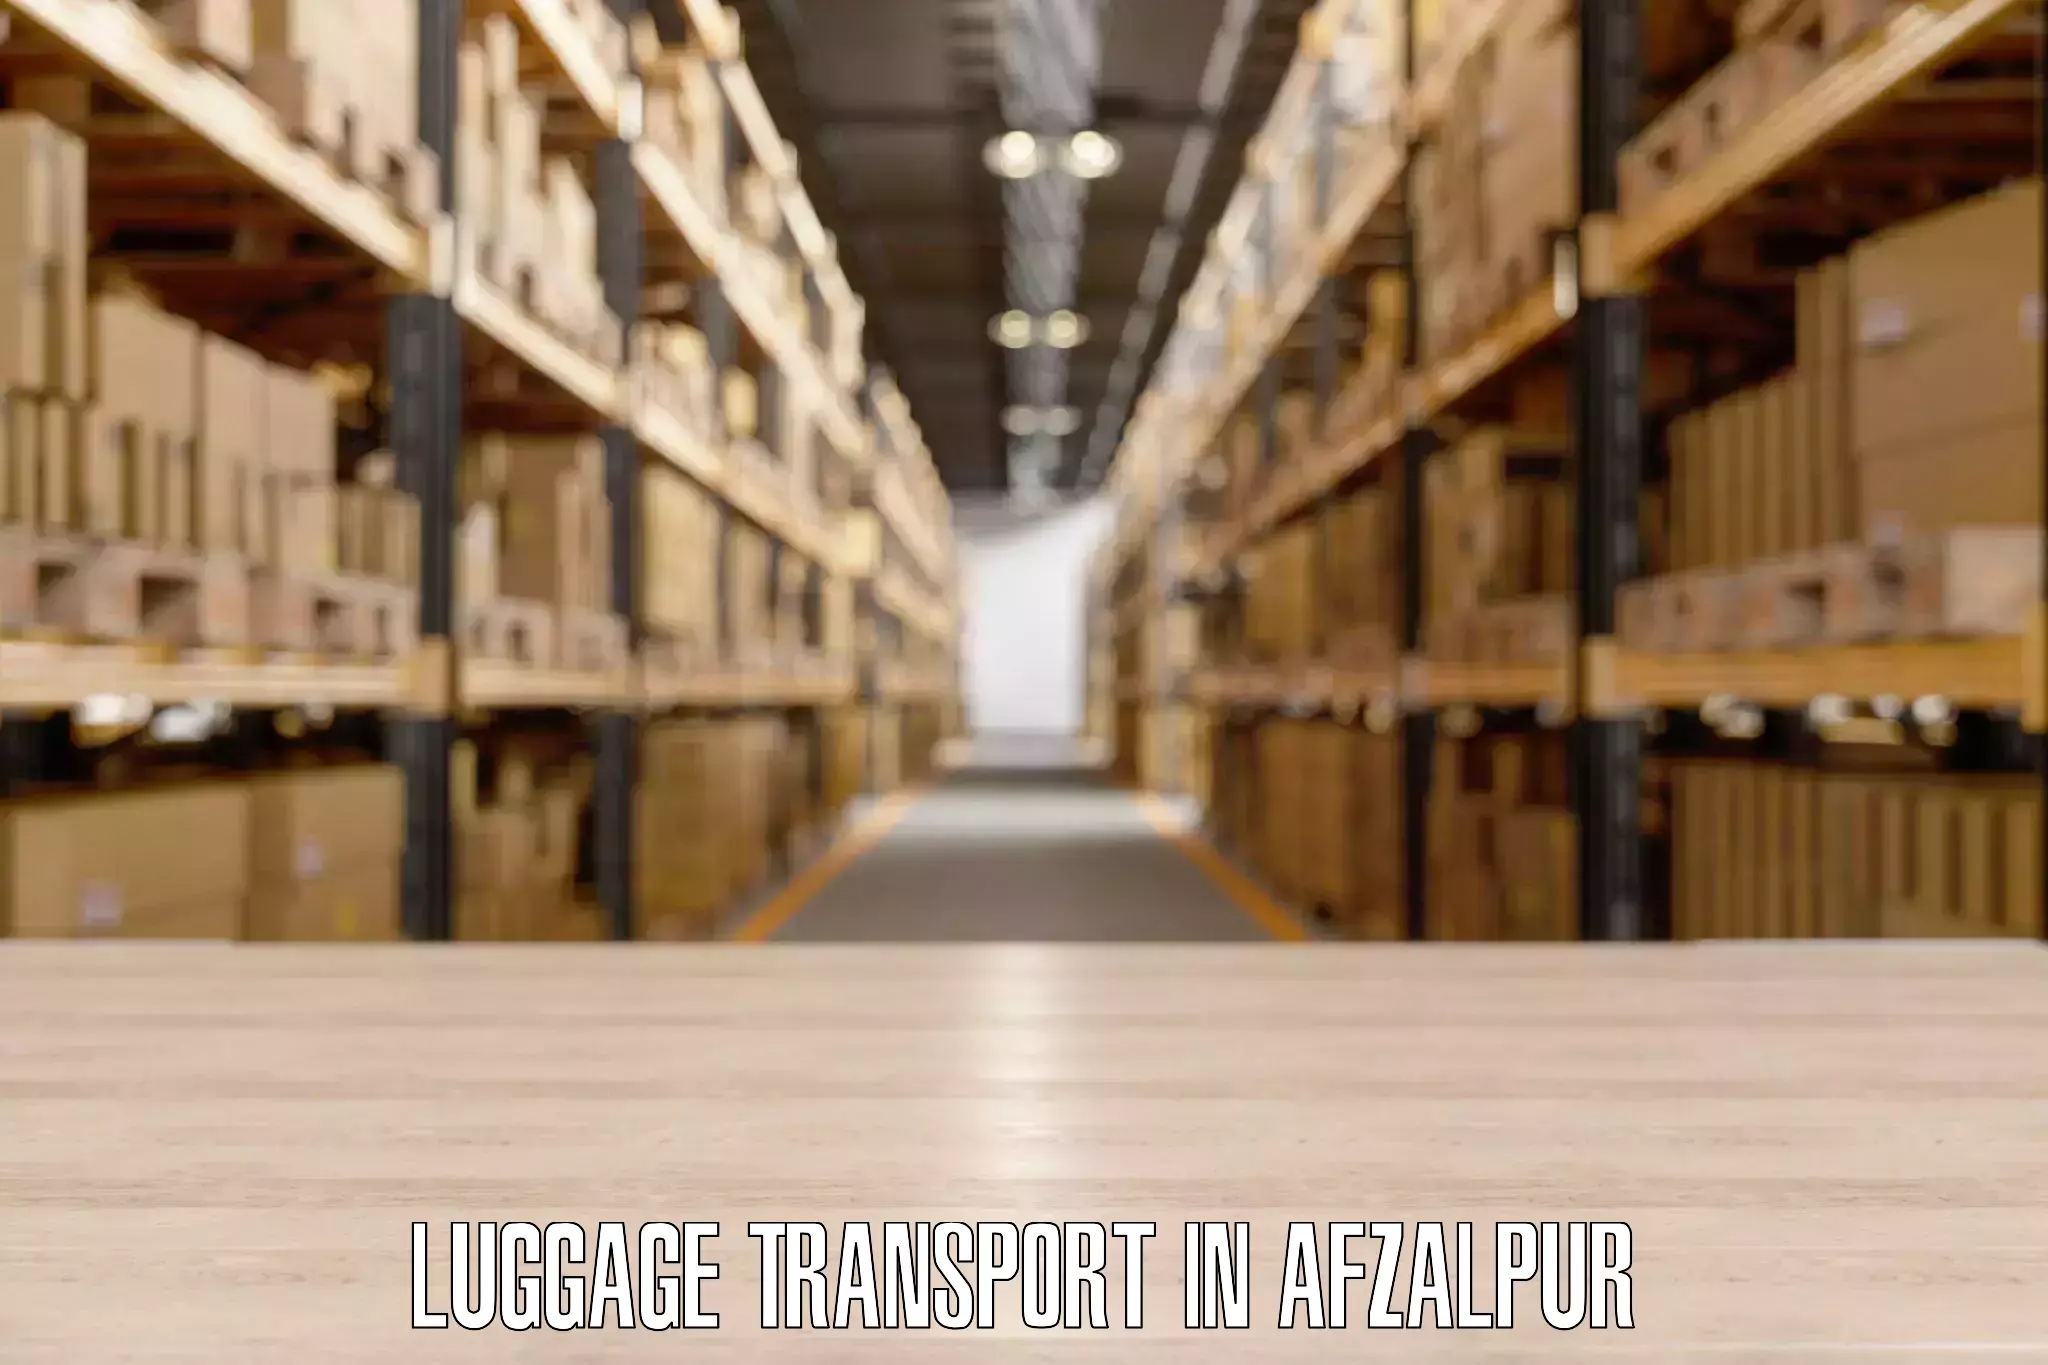 Baggage transport technology in Afzalpur